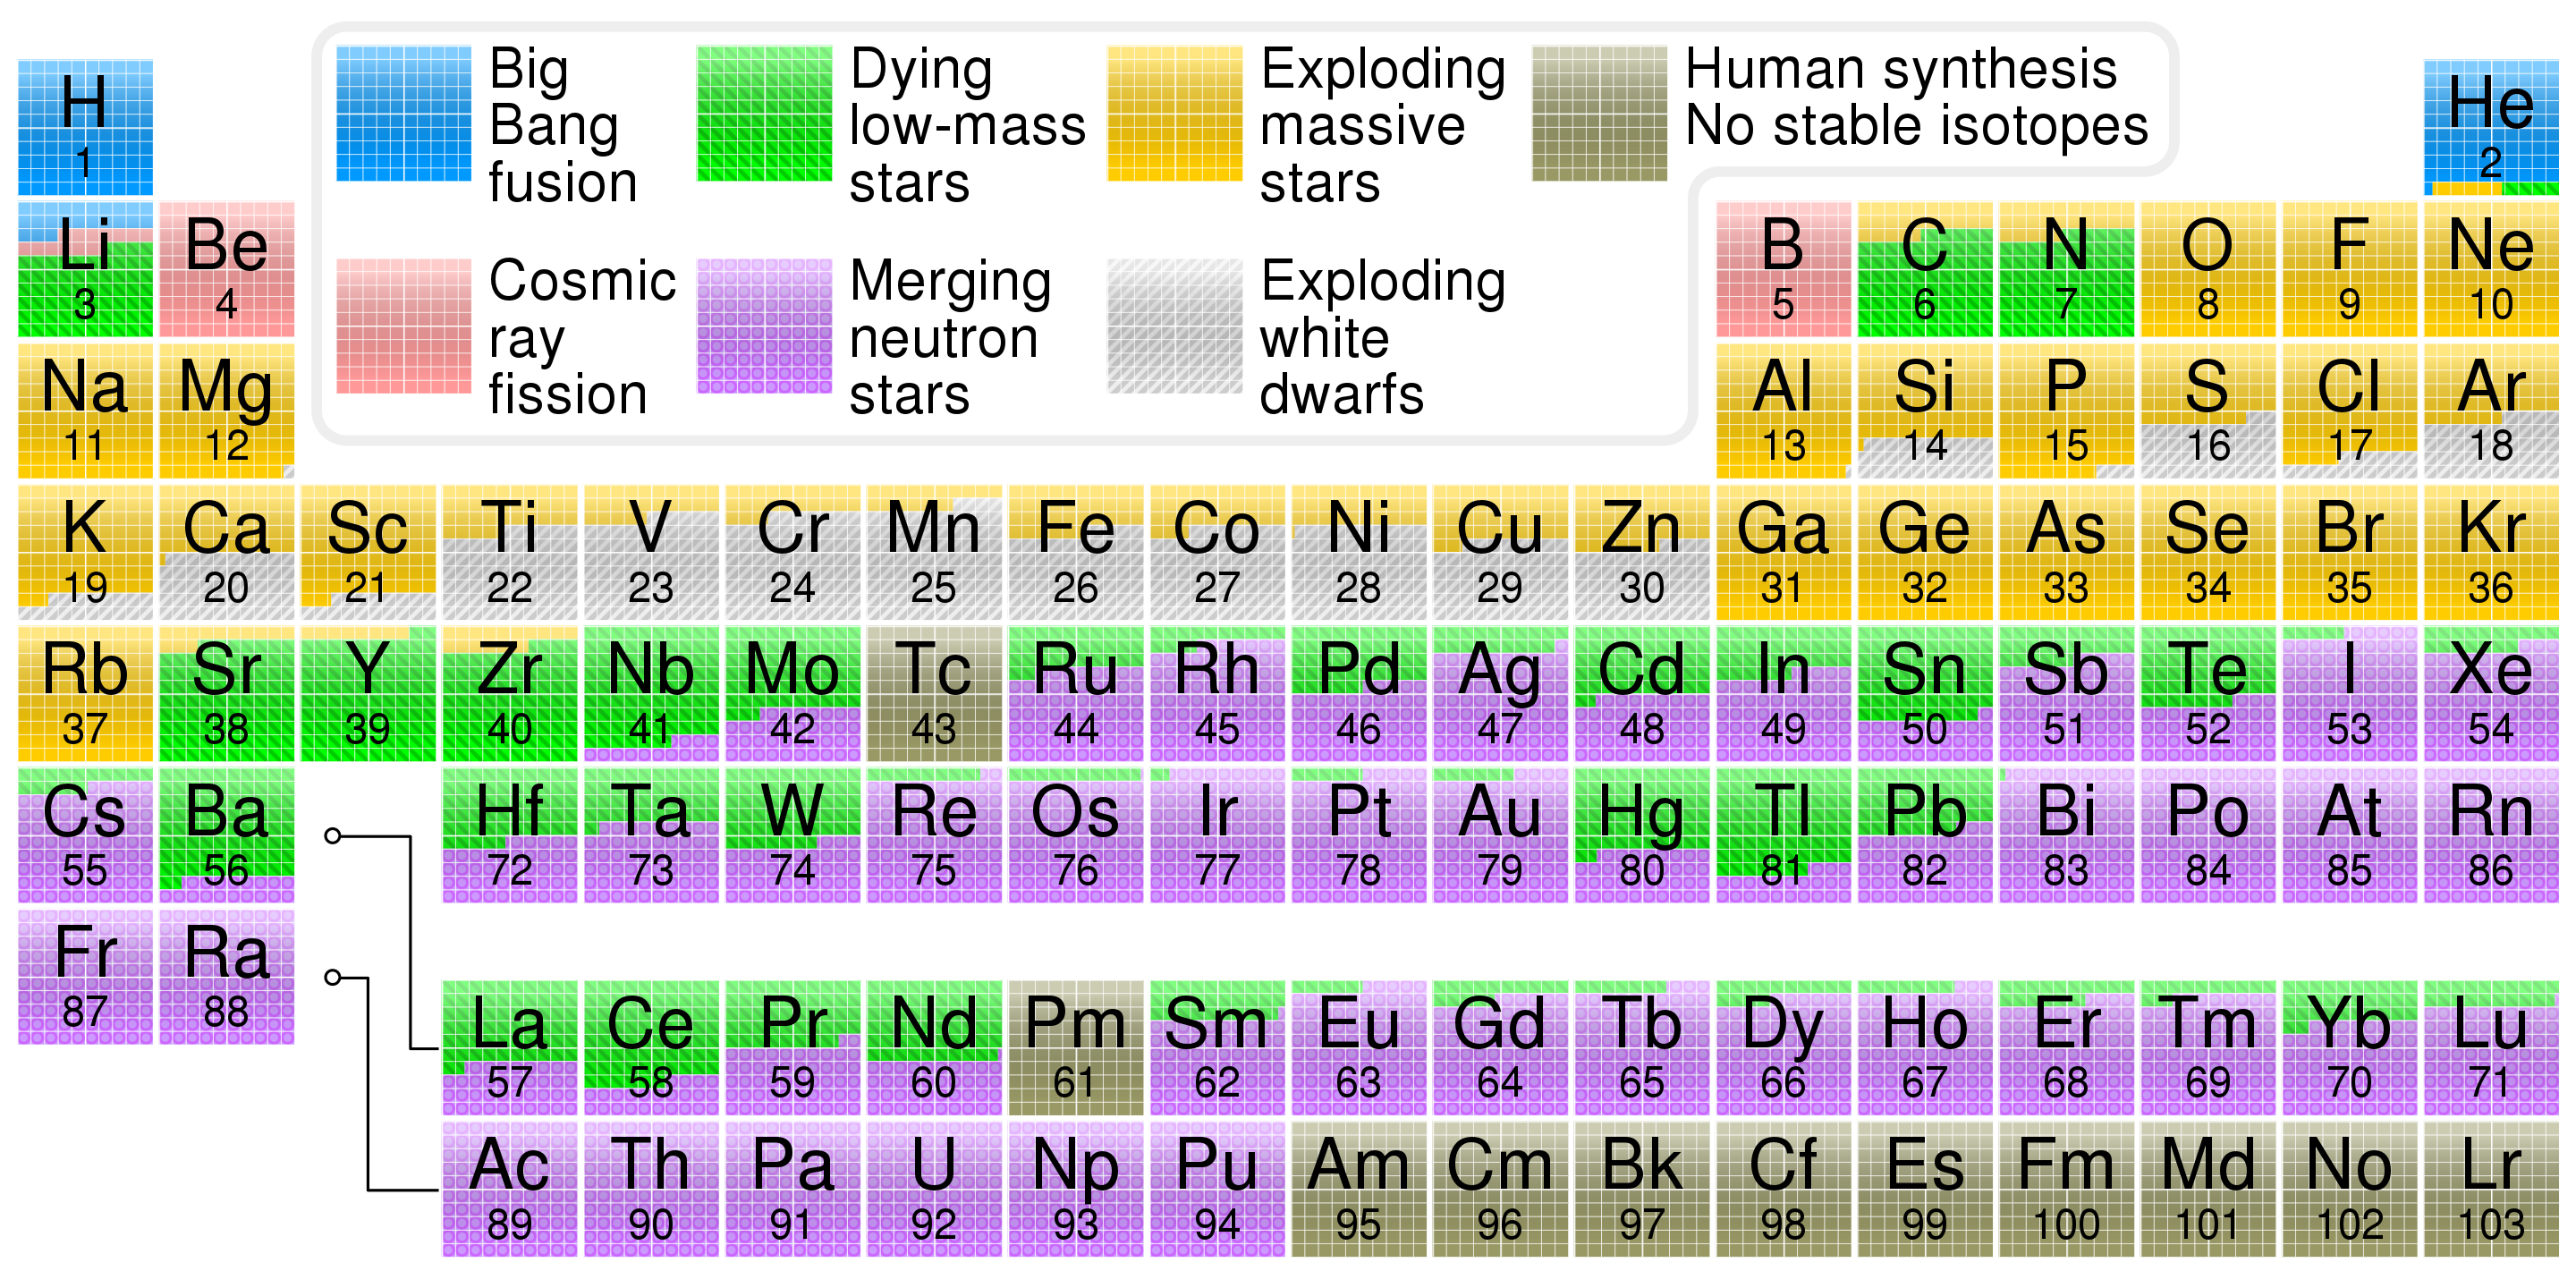 Periodic table showing the cosmic origin of each element.